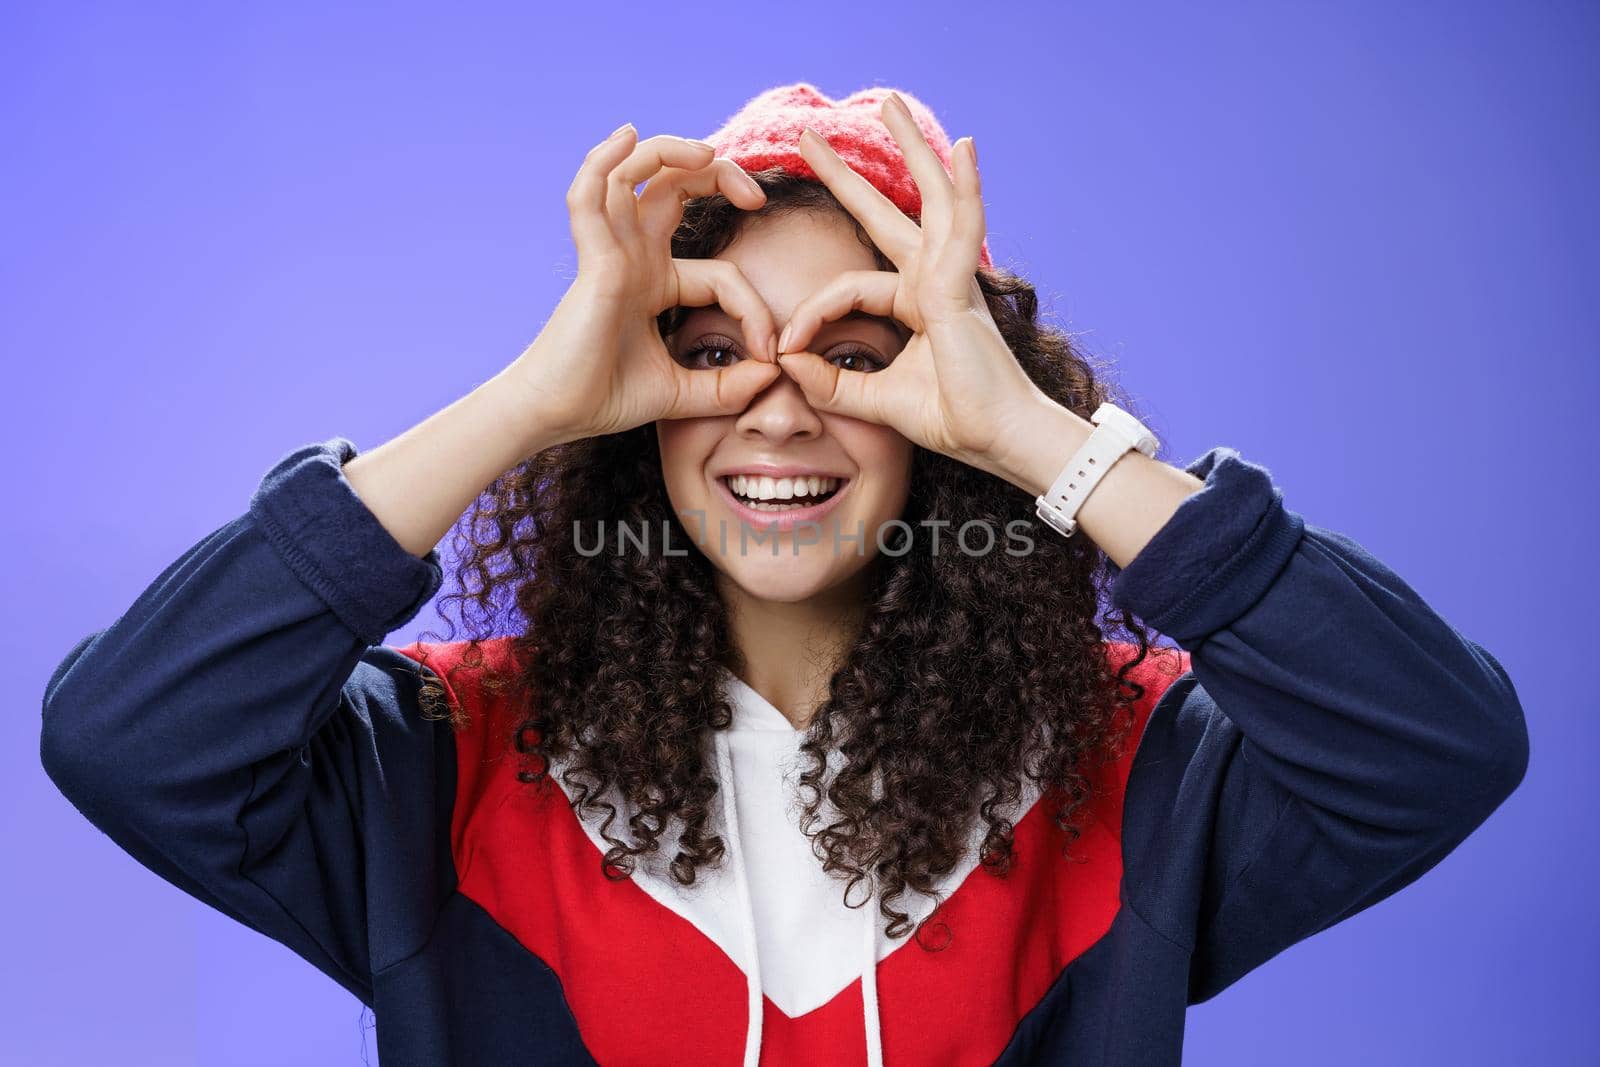 Girl see us as imitating peek with binocular making circles over eyes and looking through it joyful and excited, having fun fooling around posing happy and cute over blue background in outdoor outfit by Benzoix